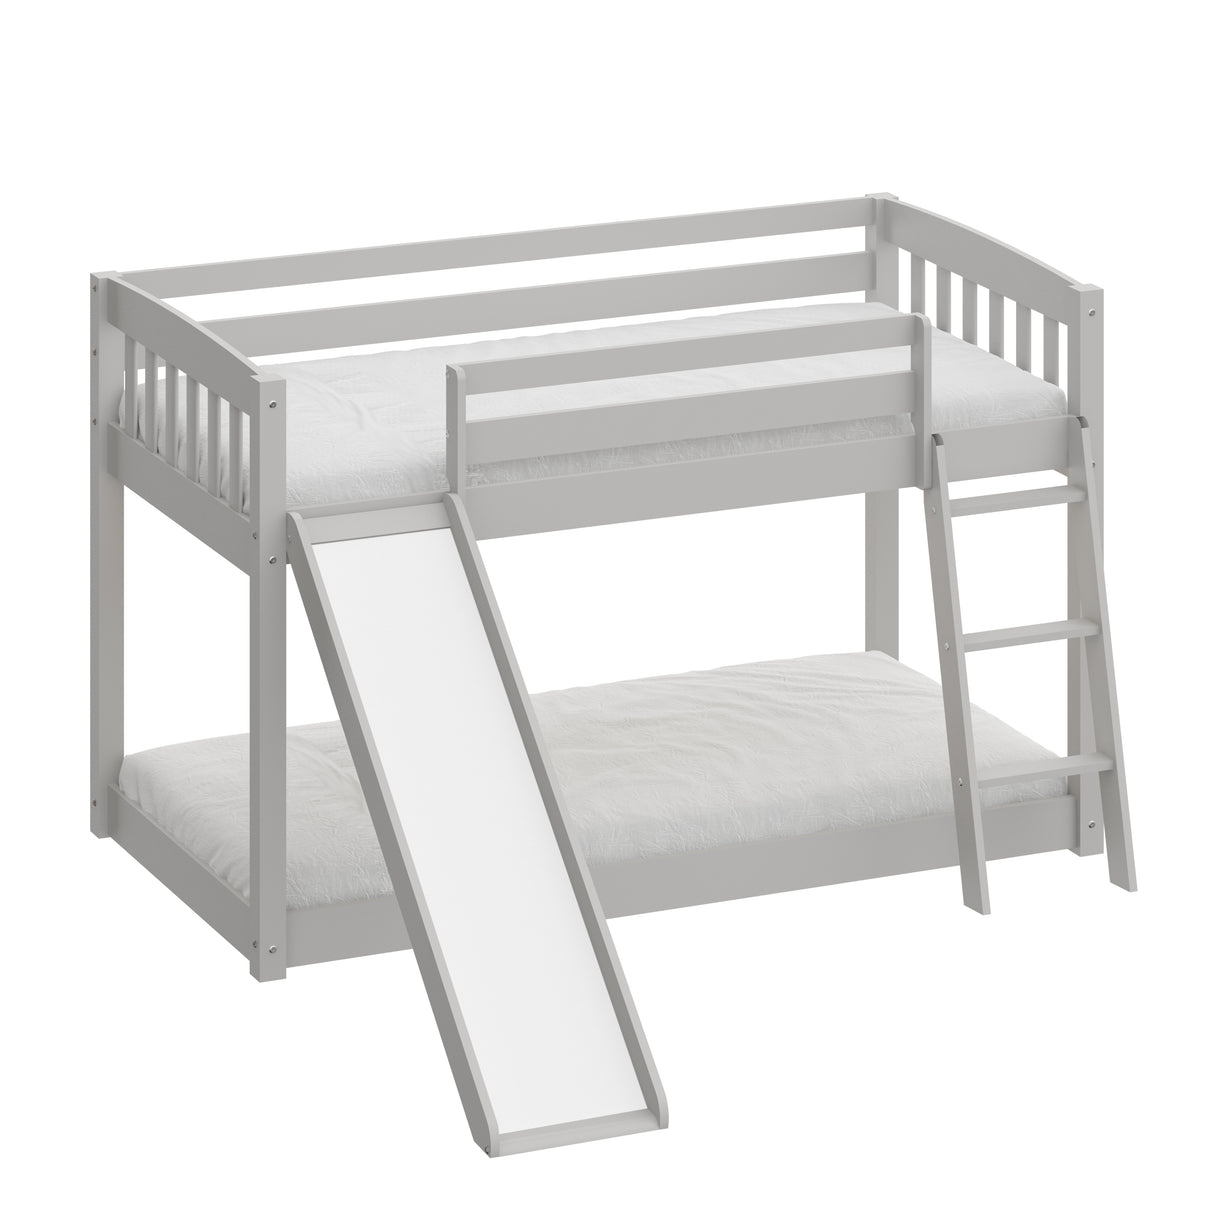 Yes4wood Kids Bunk Bed Twin Over Twin with Slide & Ladder, Heavy Duty Solid Wood Twin Bunk Beds Frame with Safety Guardrails for Toddlers, Gray - Home Elegance USA